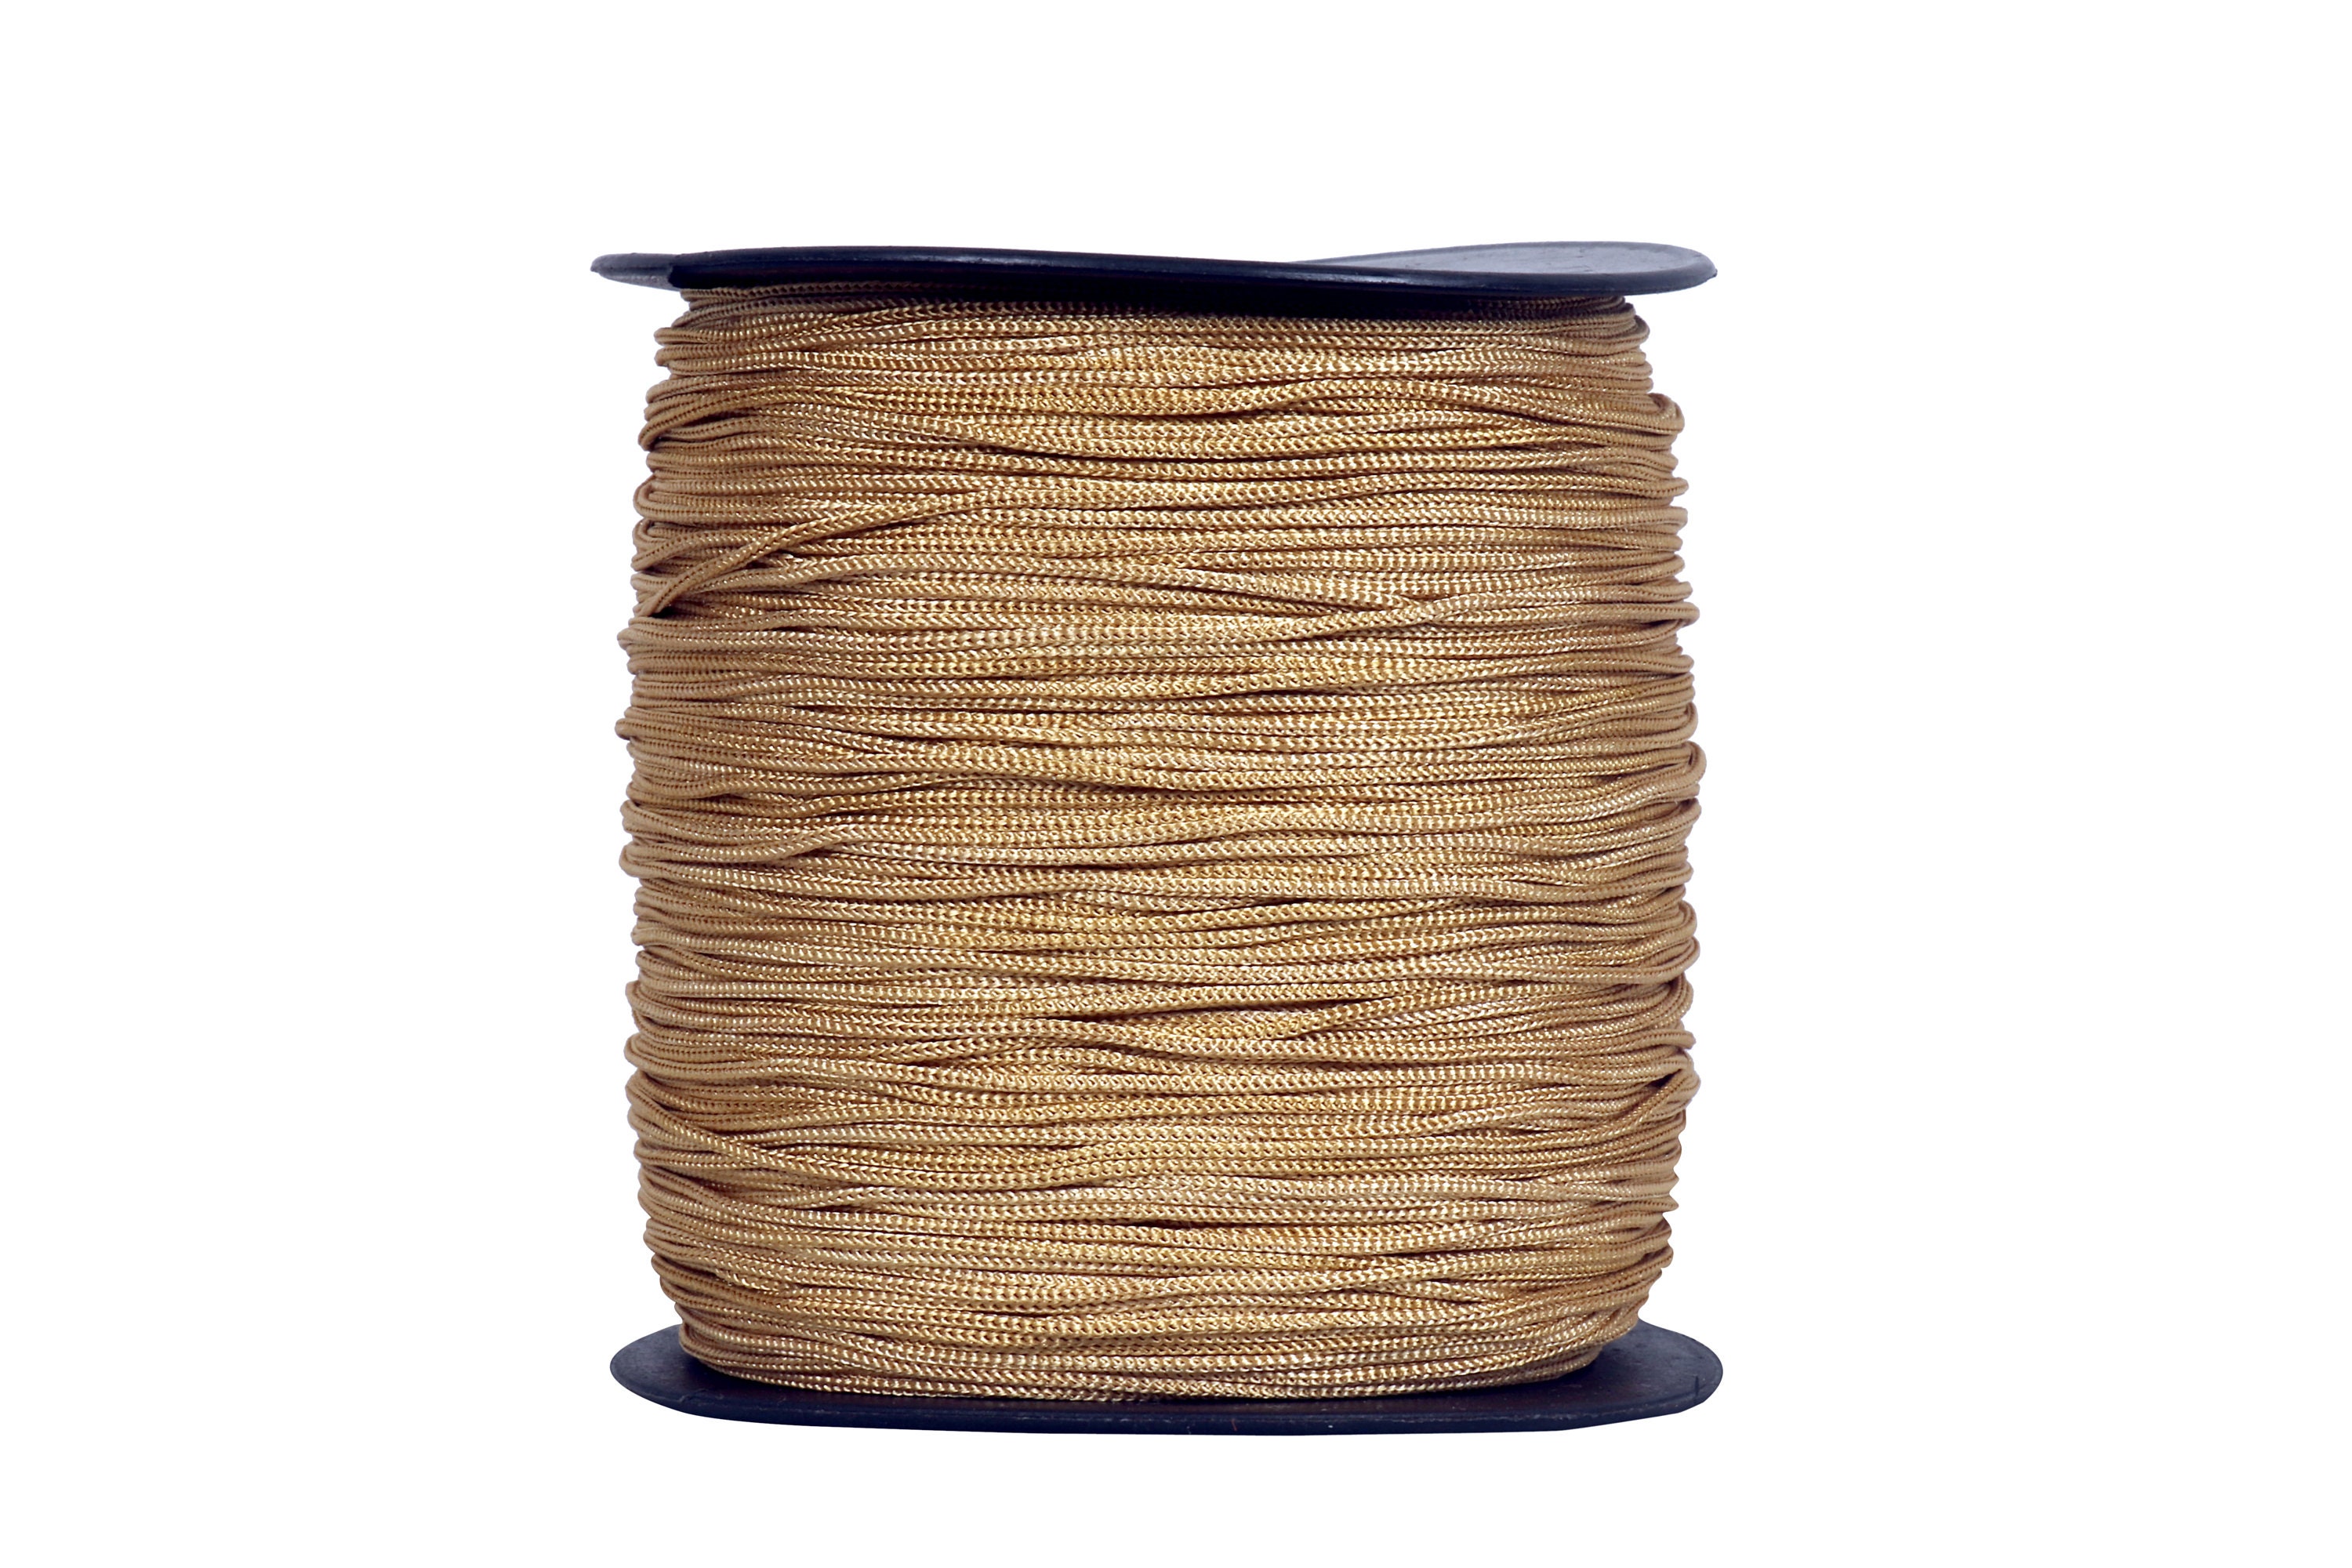 Carriage Hand Sewing Thread 35 Yards Beige from Tandy Leather